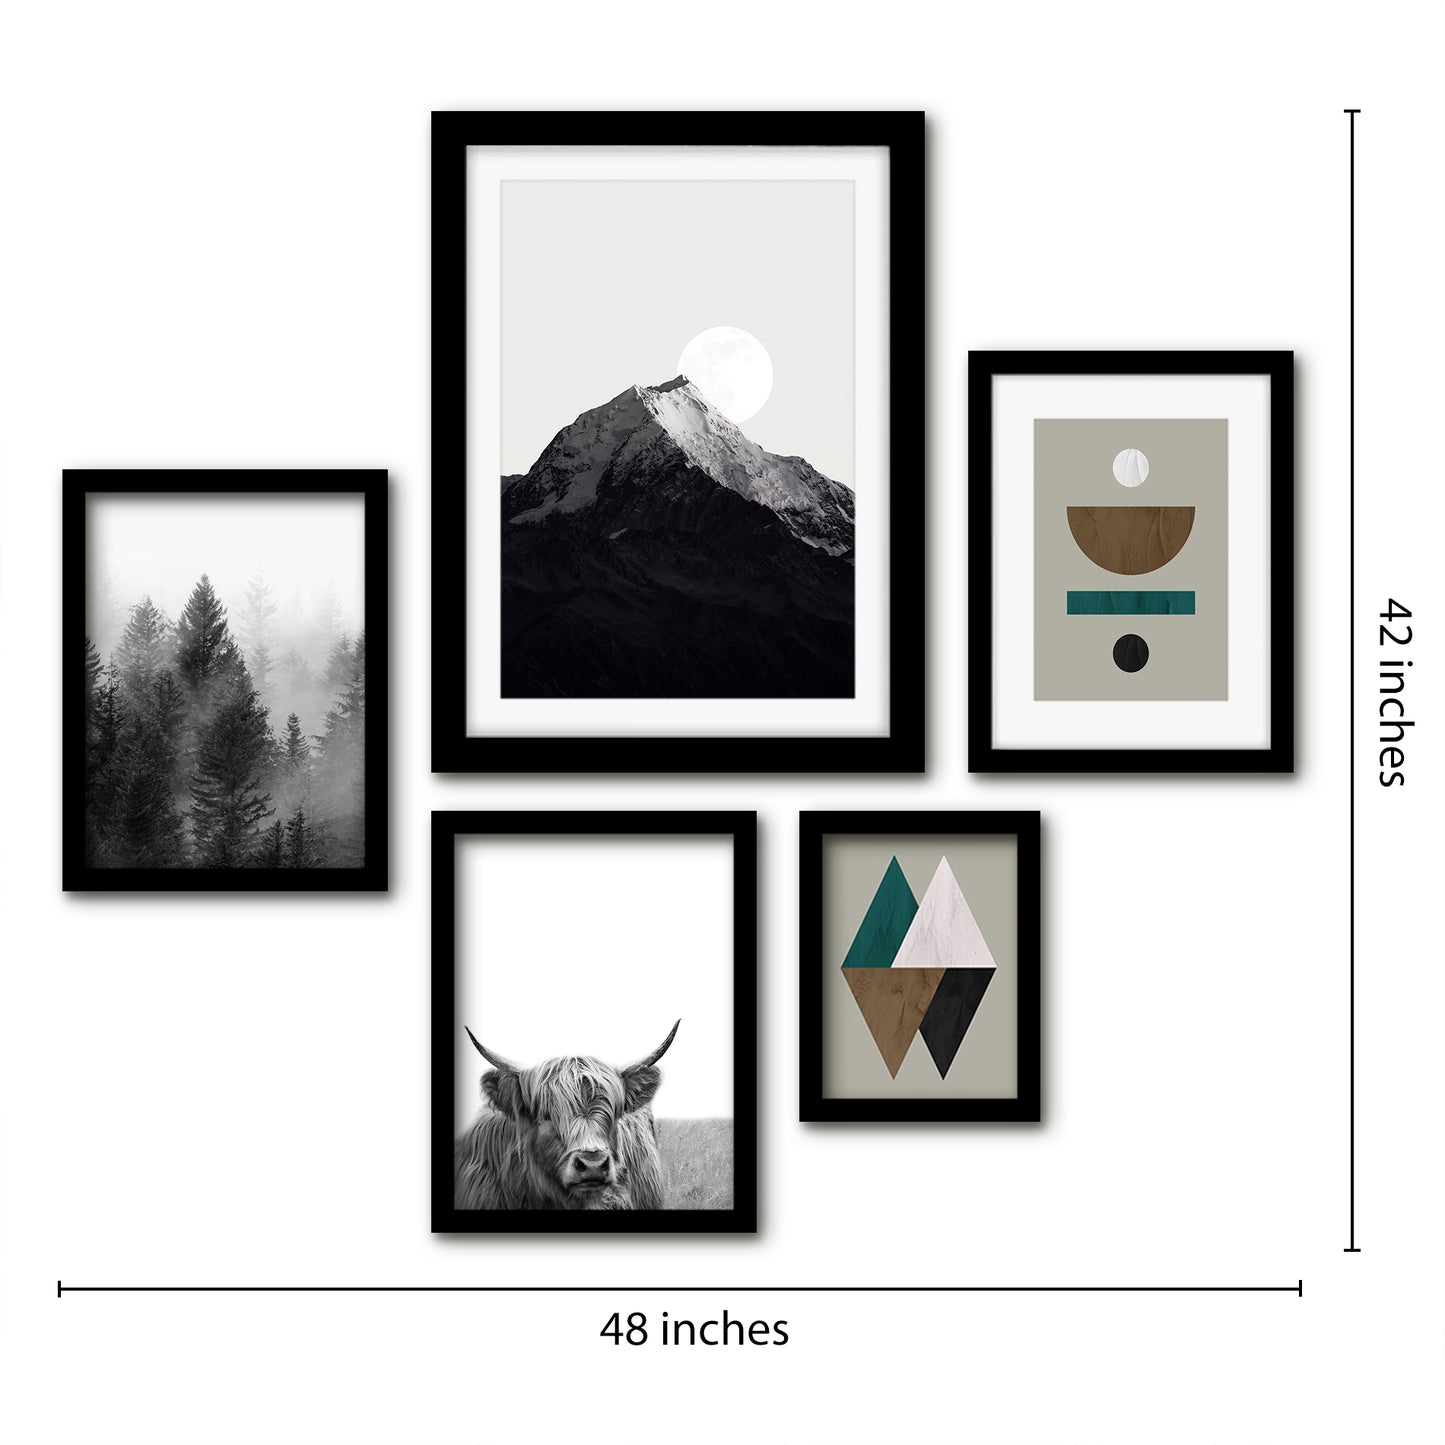 Americanflat 5 Piece Black Framed Gallery Wall Art Set - Black & White Landscape & Earth Tones Abstract Nature